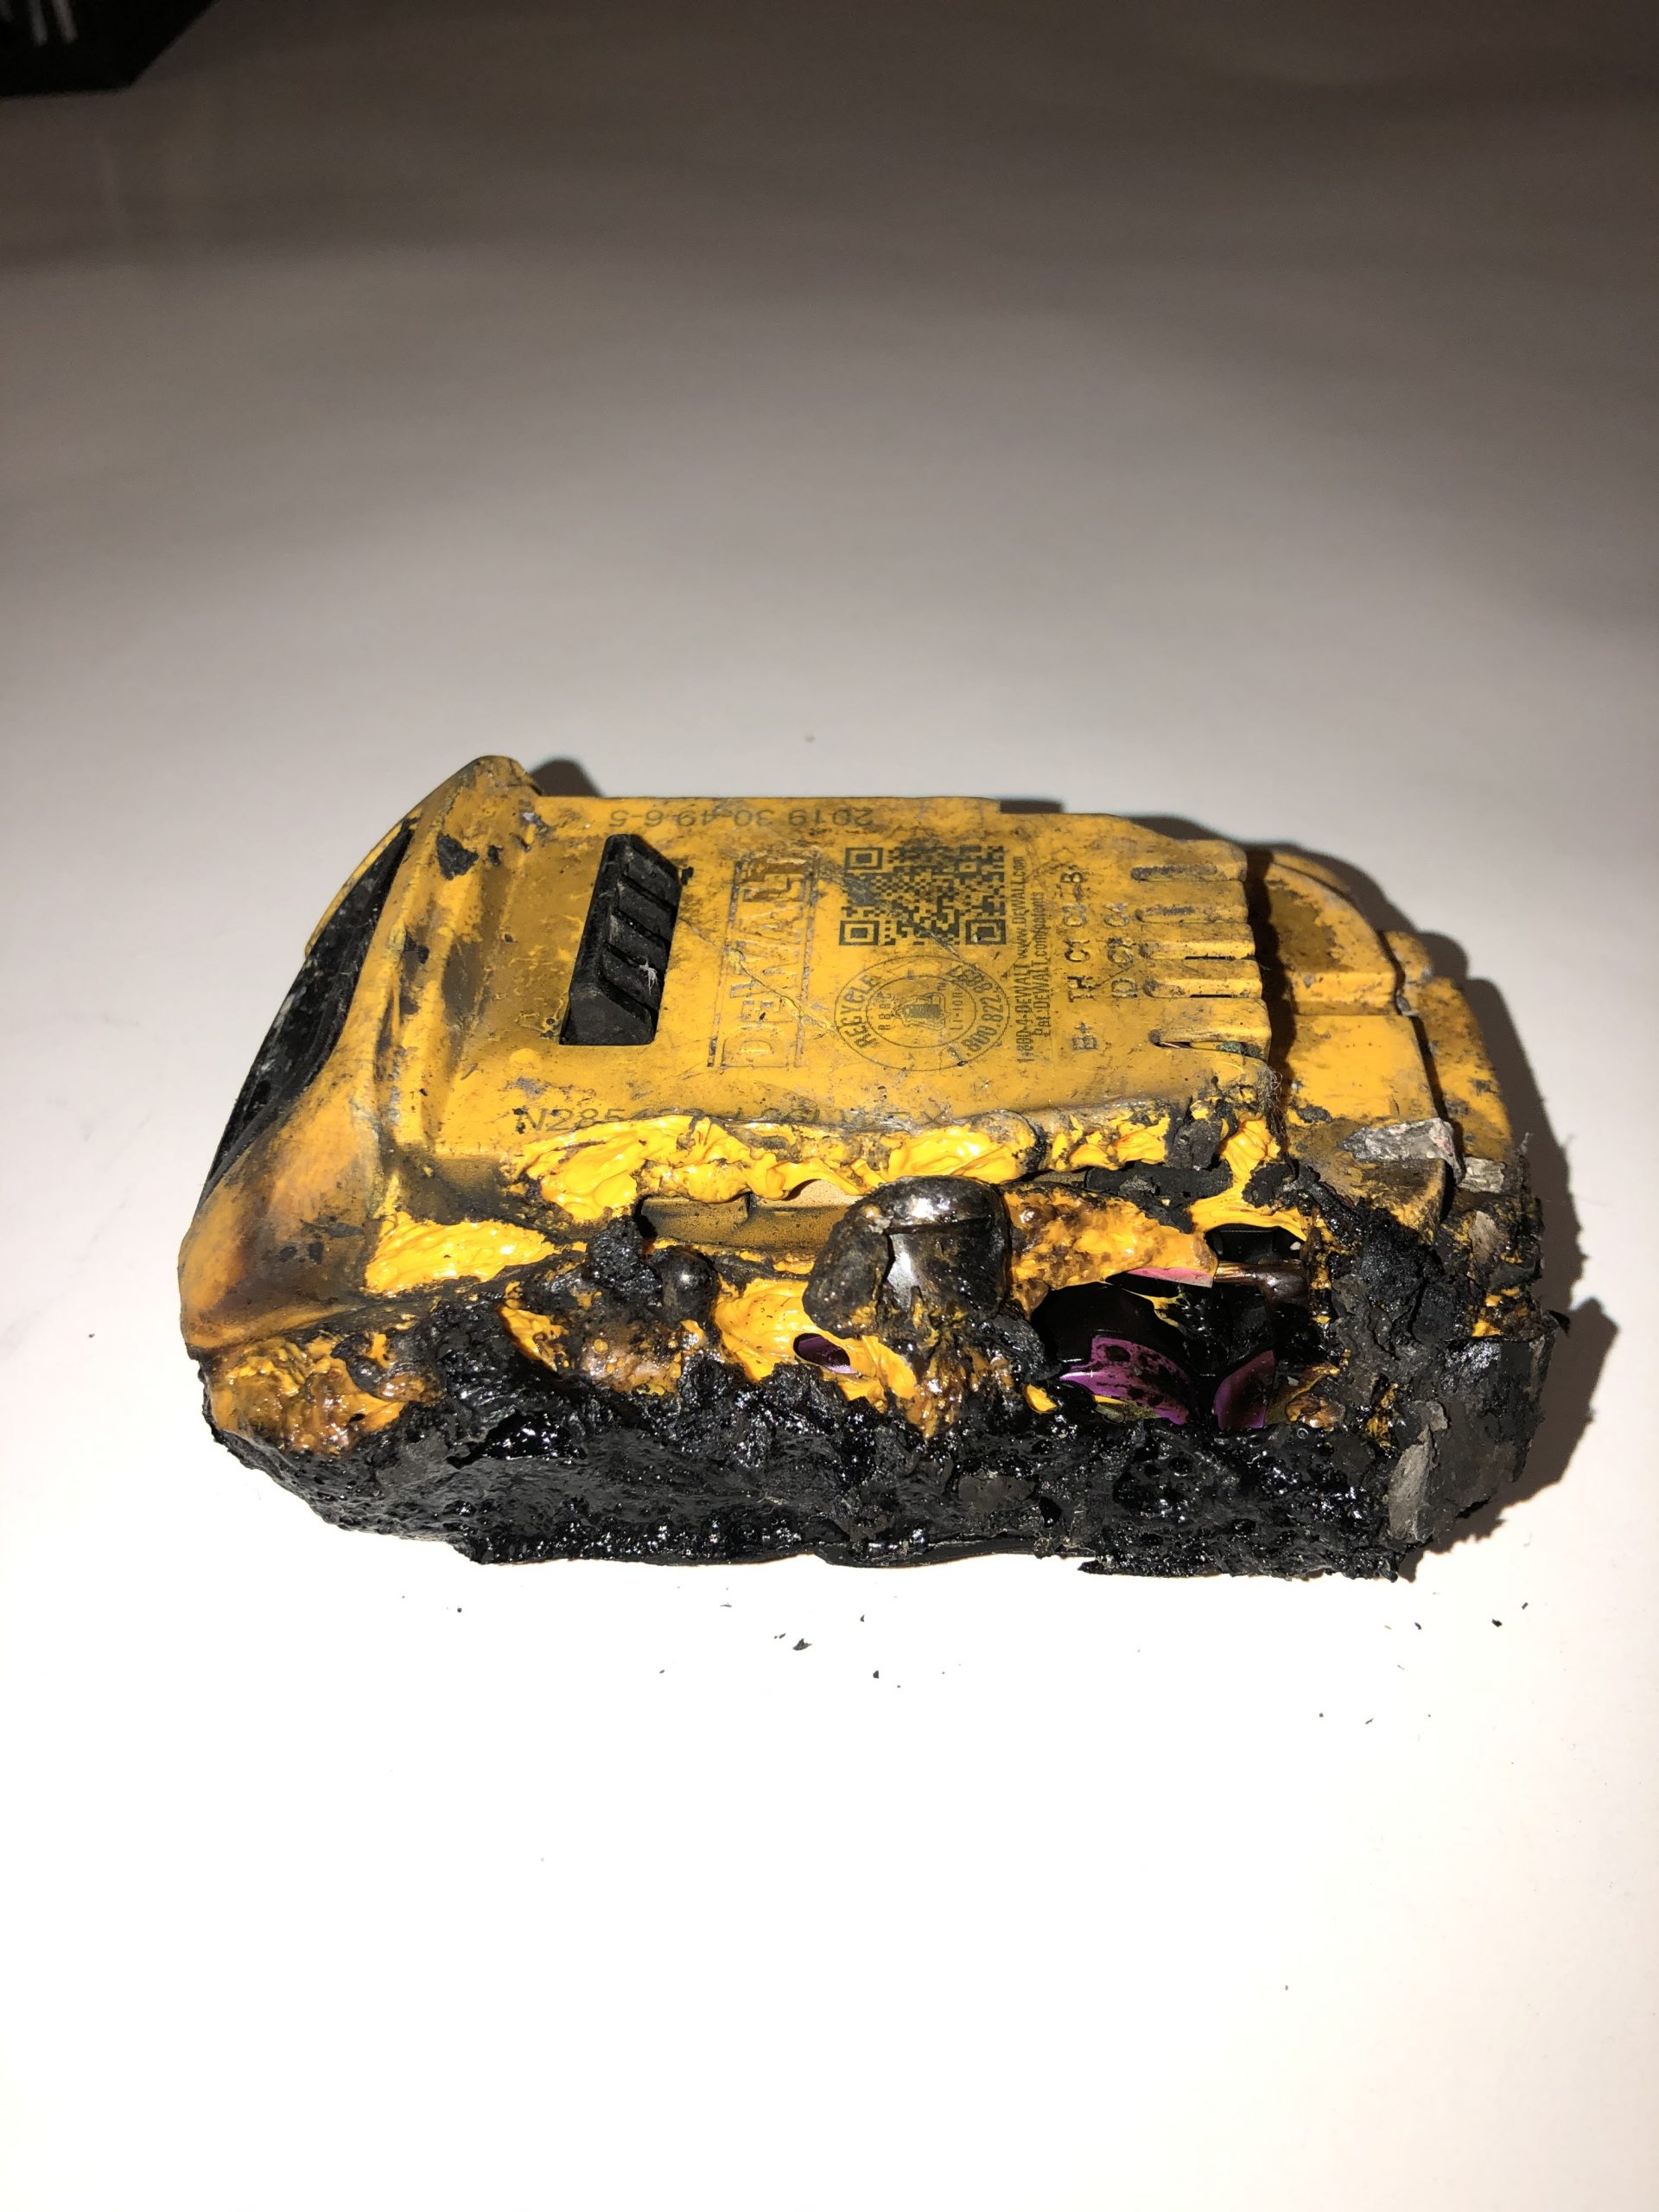 lithium battery fire